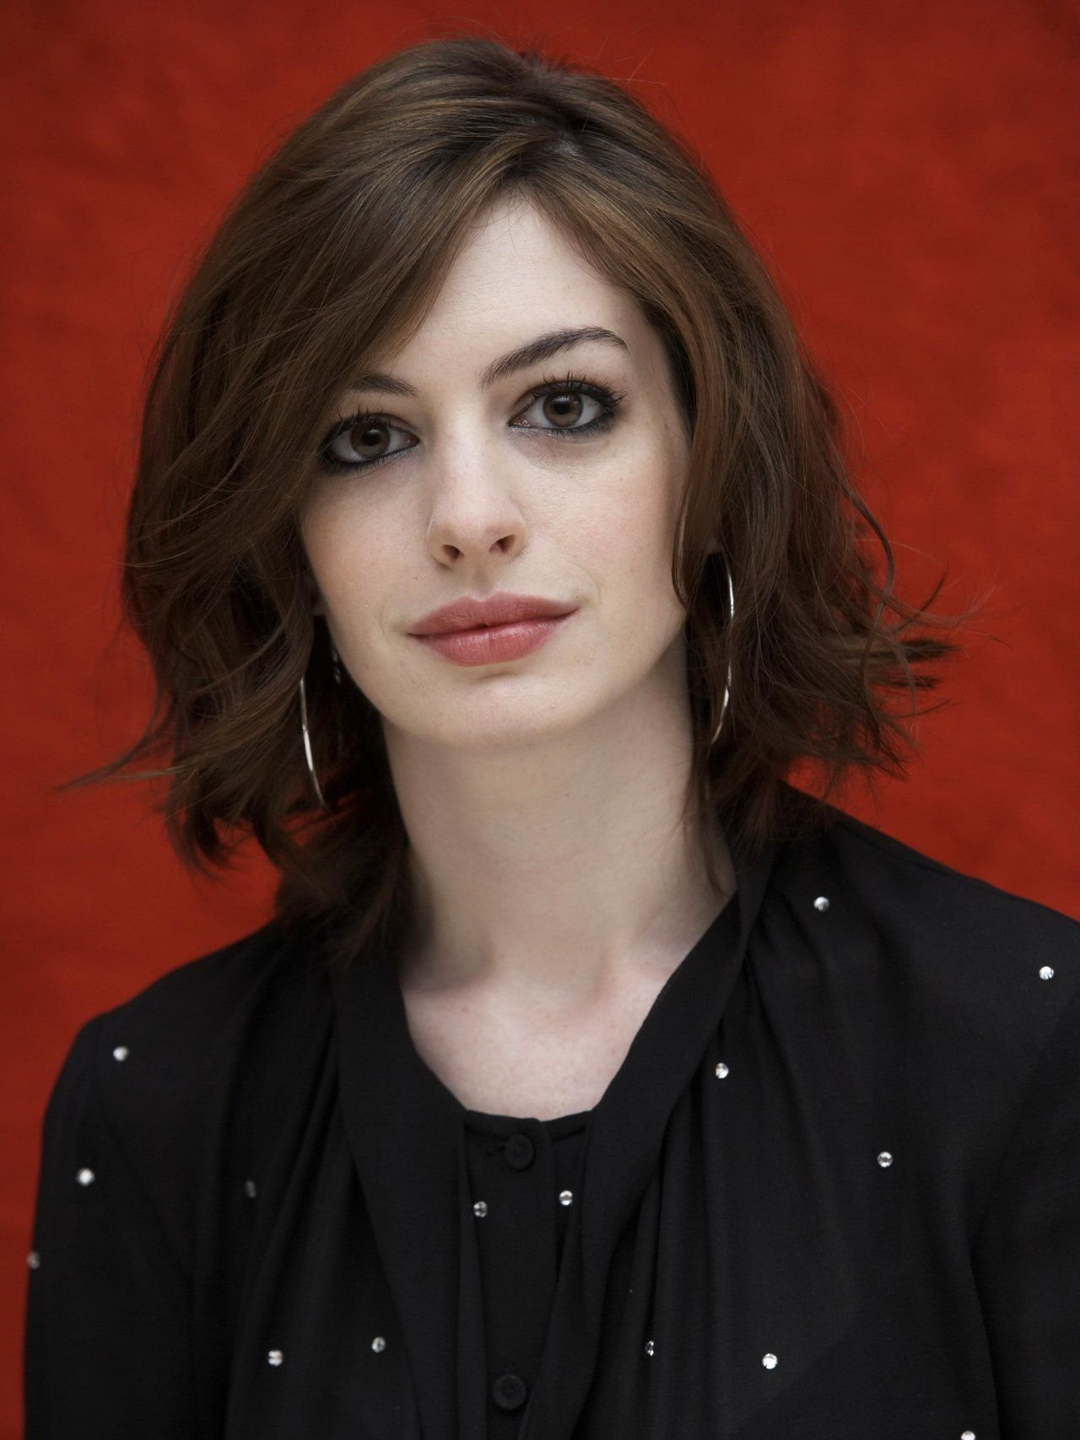 Anne Hathaway young pics